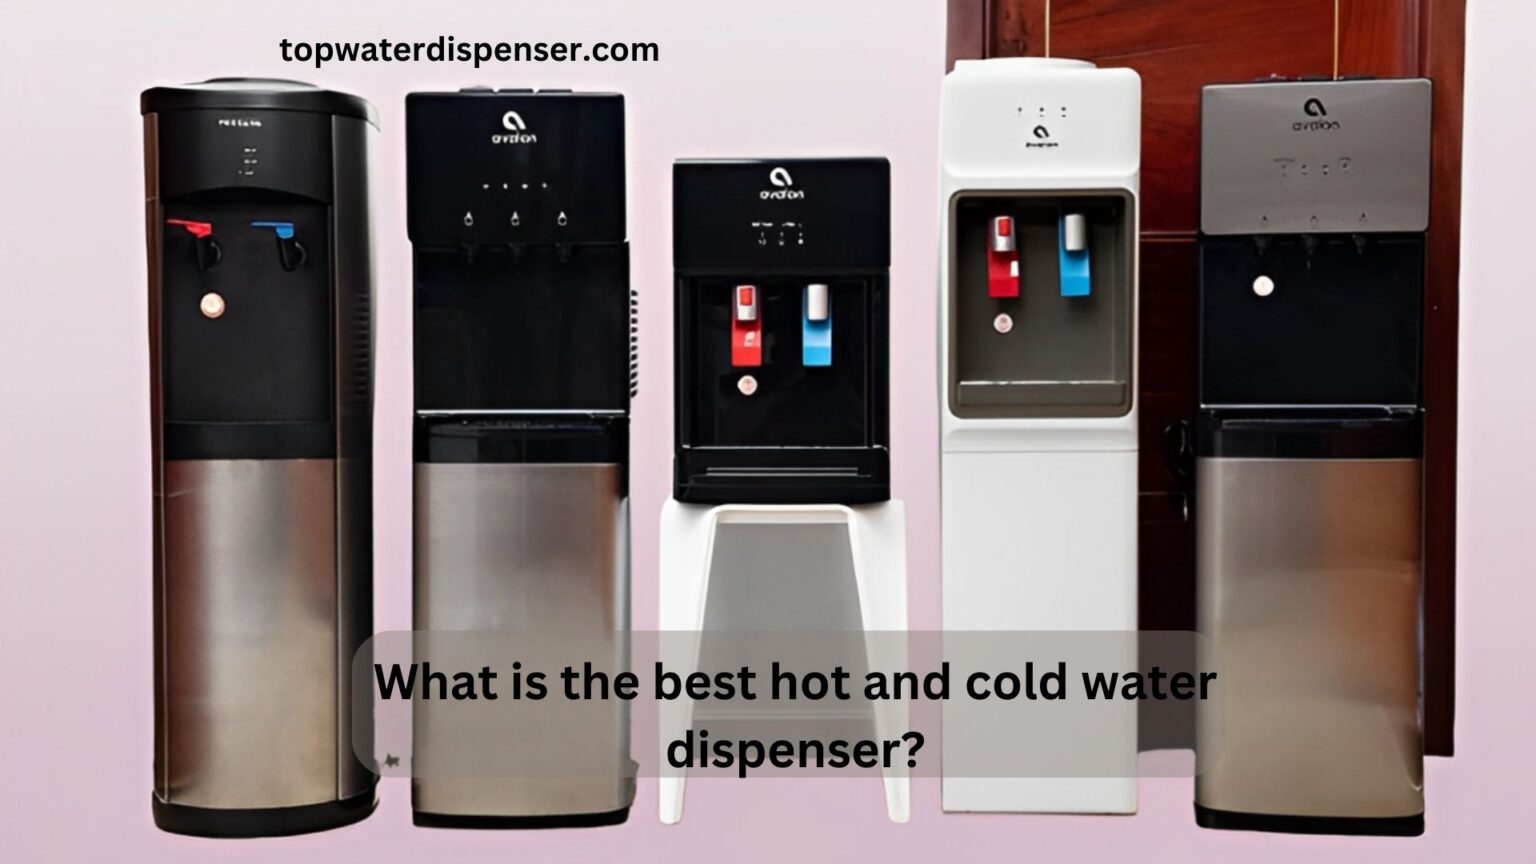 What is the best hot and cold water dispenser?